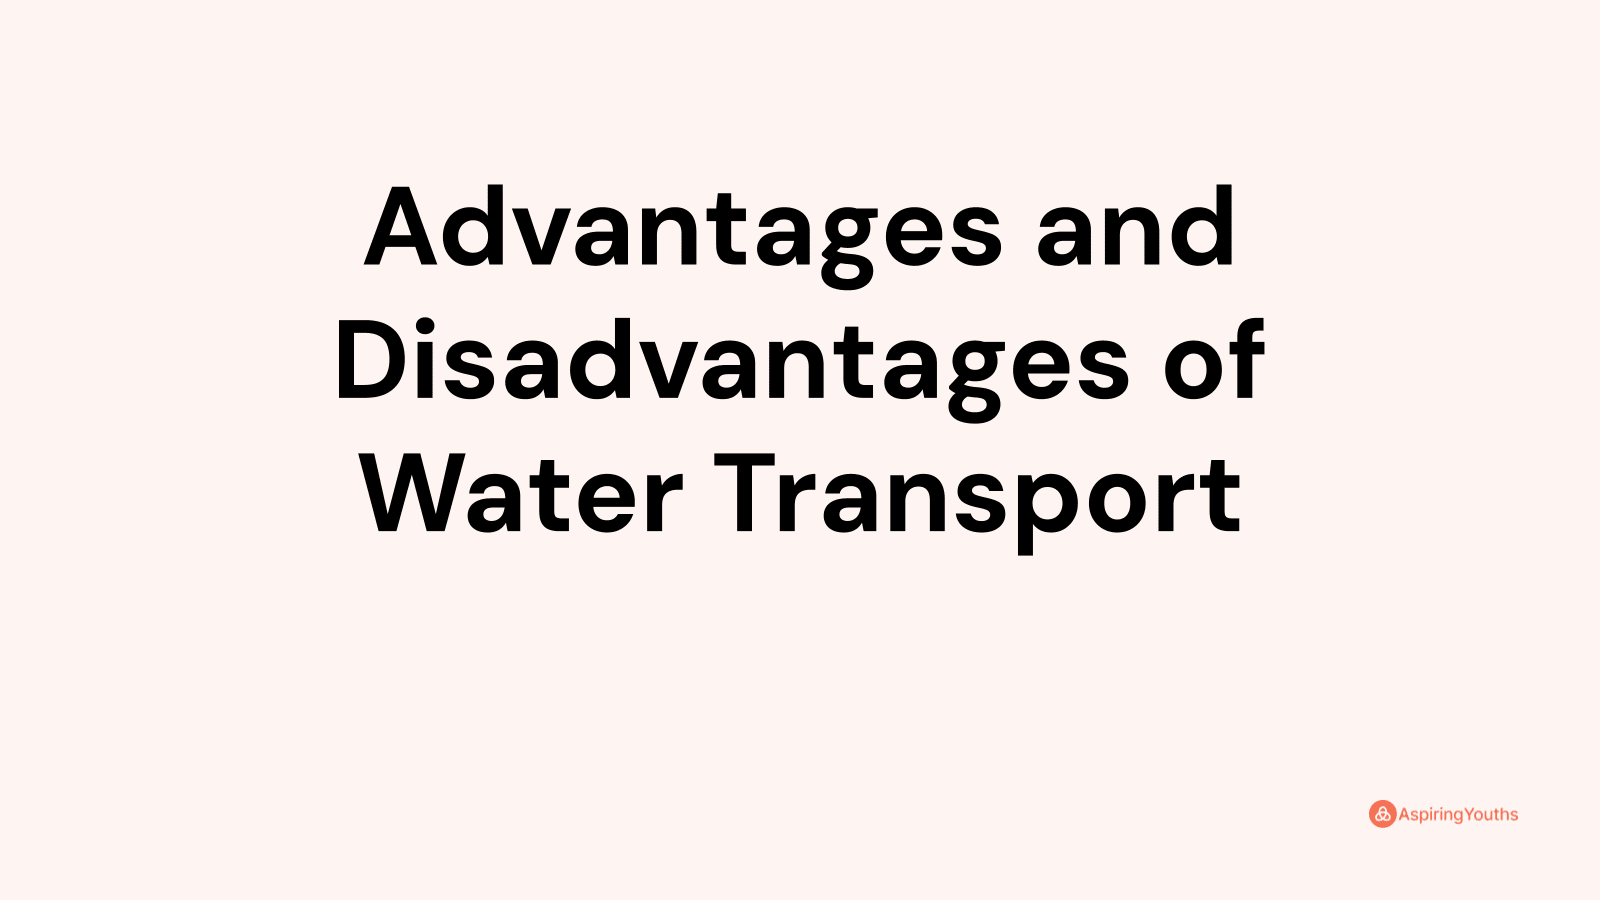 Advantages and disadvantages of Water Transport